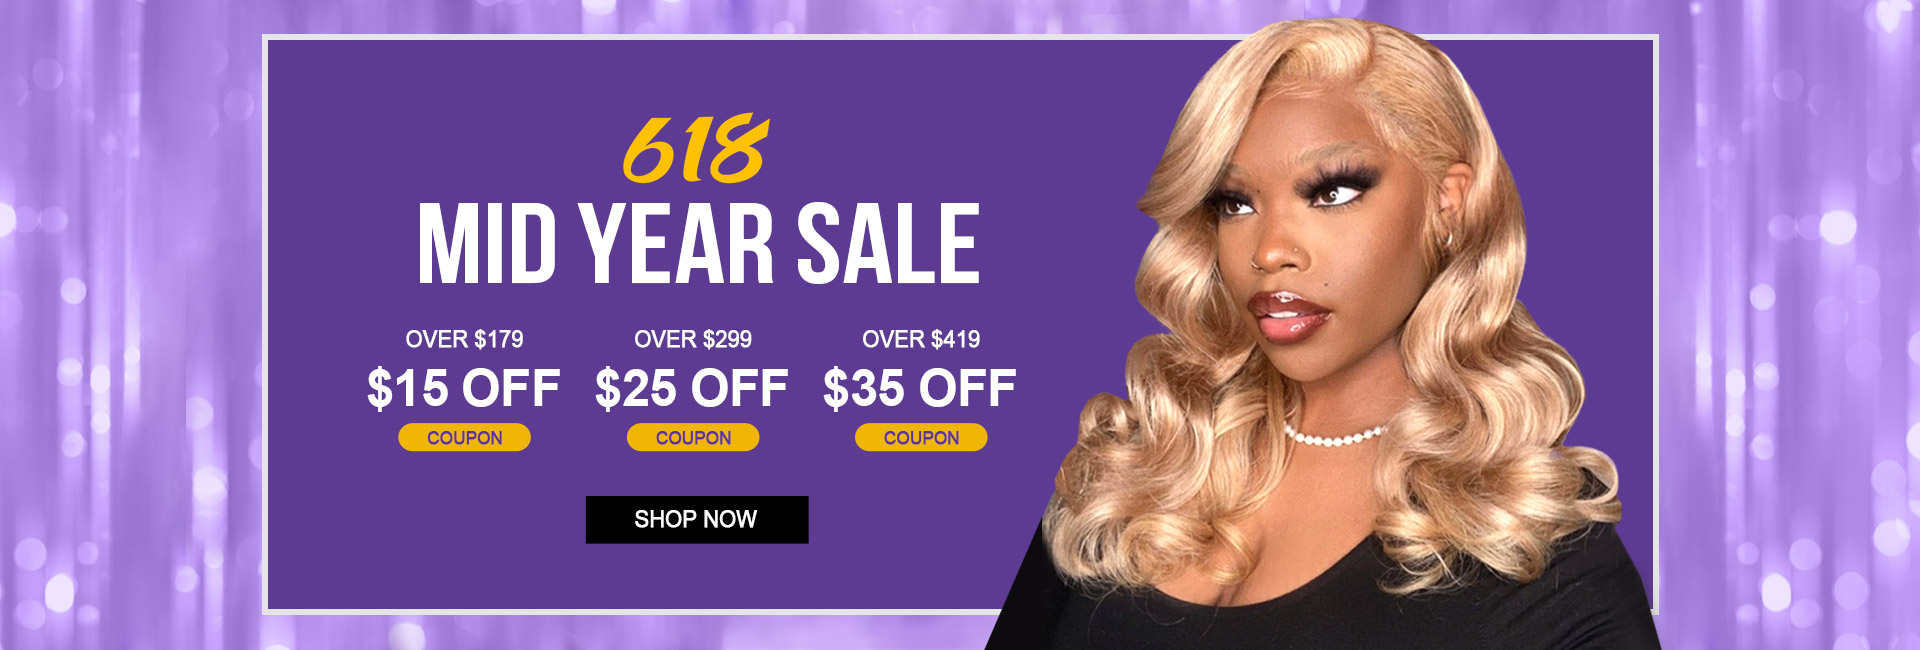 618 mid-year sale